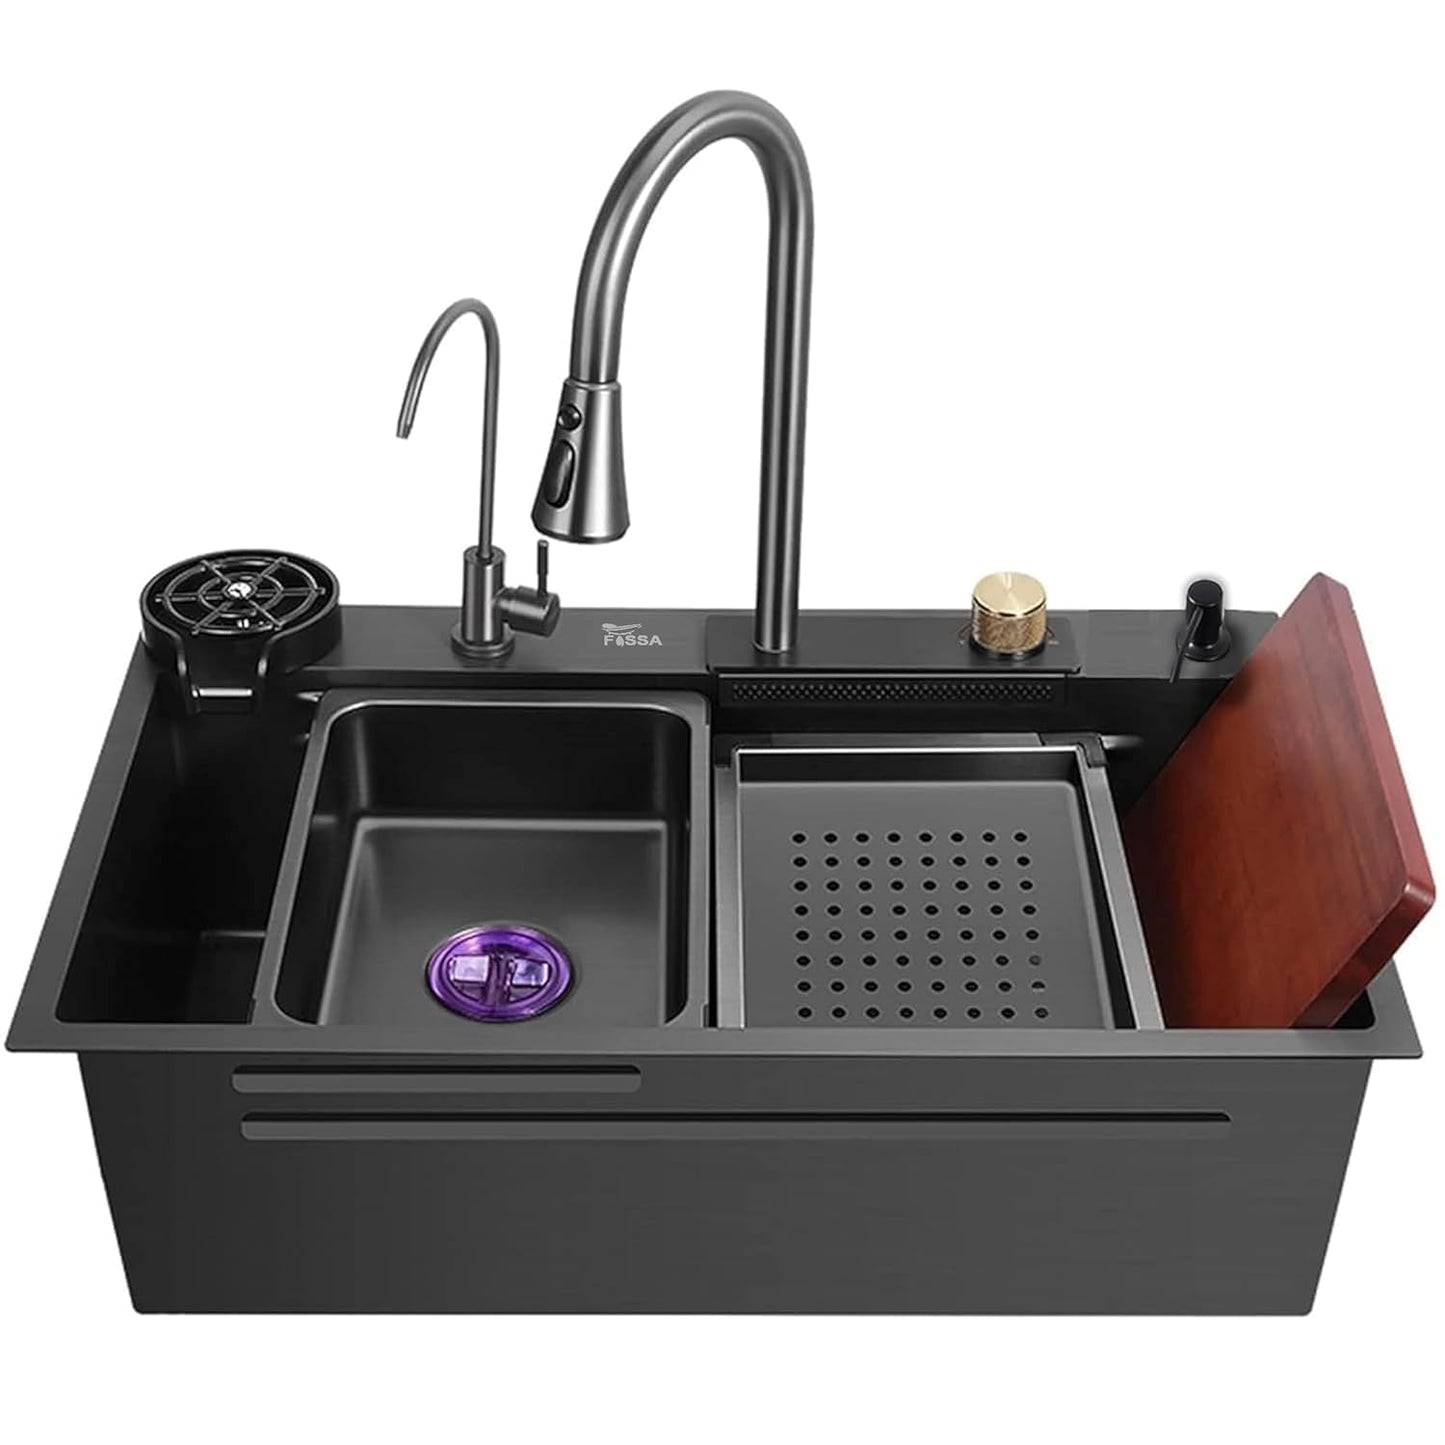 Fossa 27"x18" Single Bowl Waterfall Kitchen Sink SS-304 grade Honeycomb Embossed Sink with White Nano Coating, Stainless Steel, Rectangular Workstation, faucet With all Accessories.